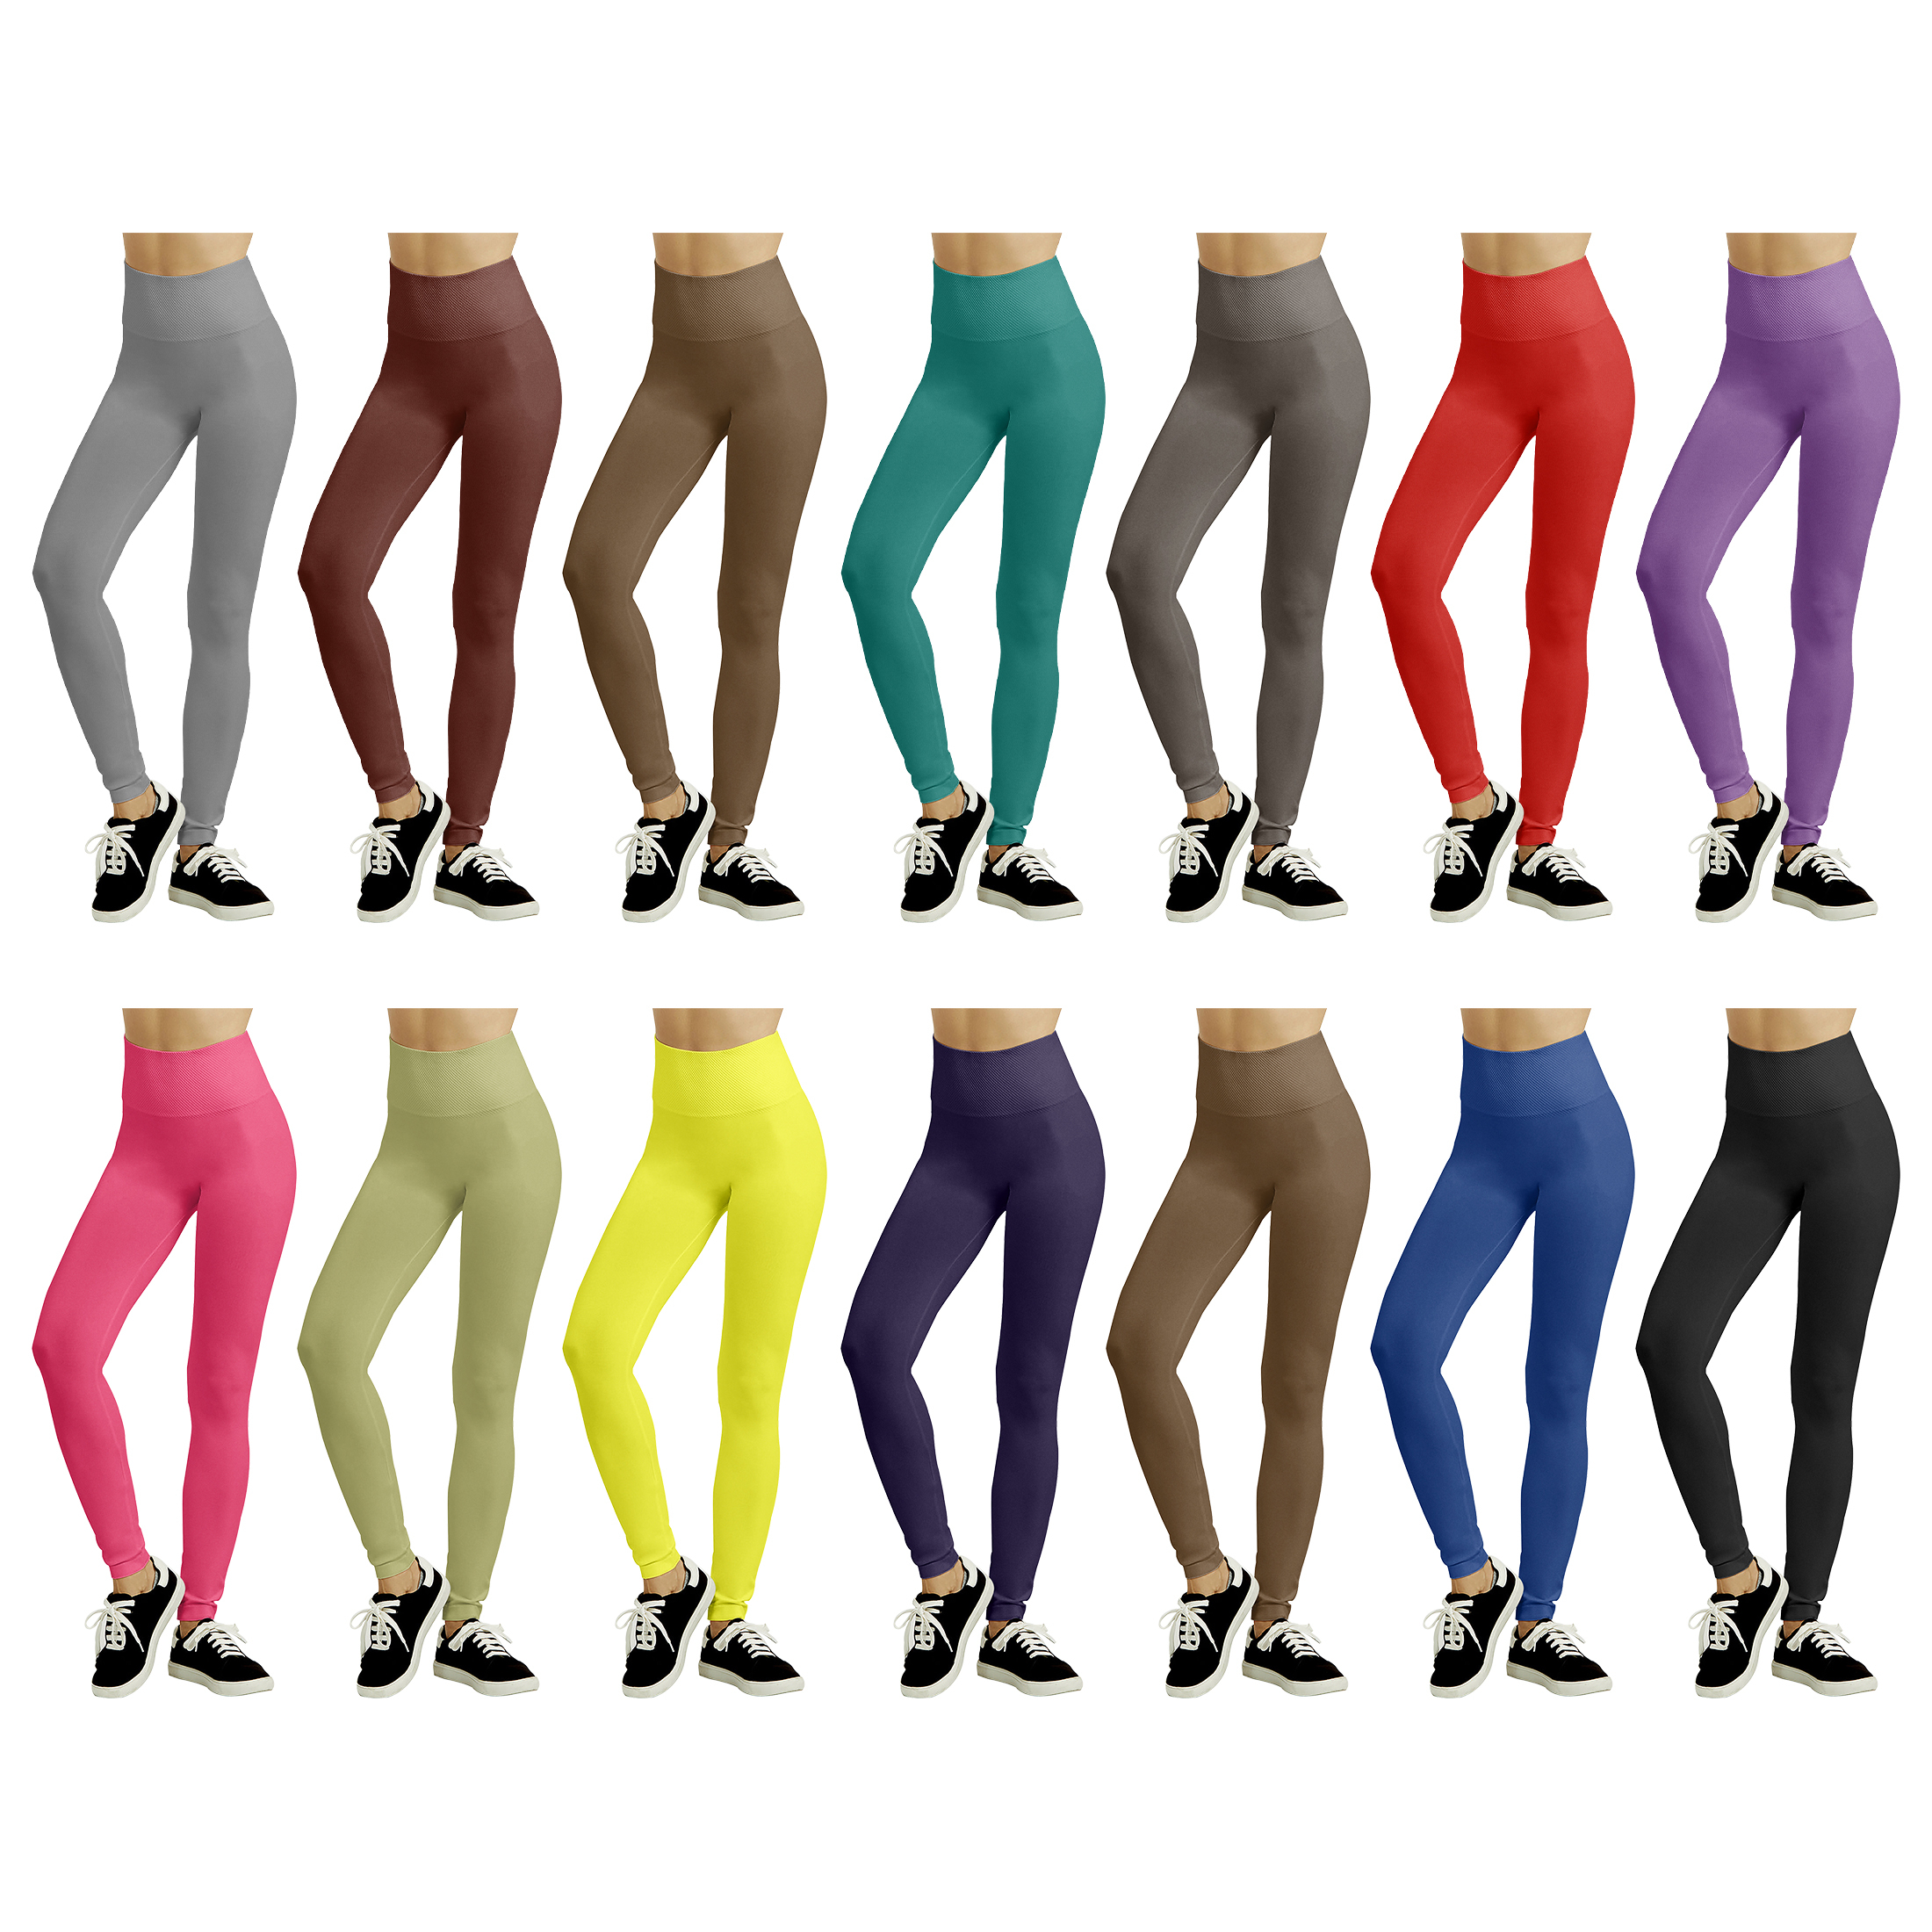 2-Pack: Women's Fleece-Lined High Waisted Workout Yoga Leggings - Solid, Small/Medium